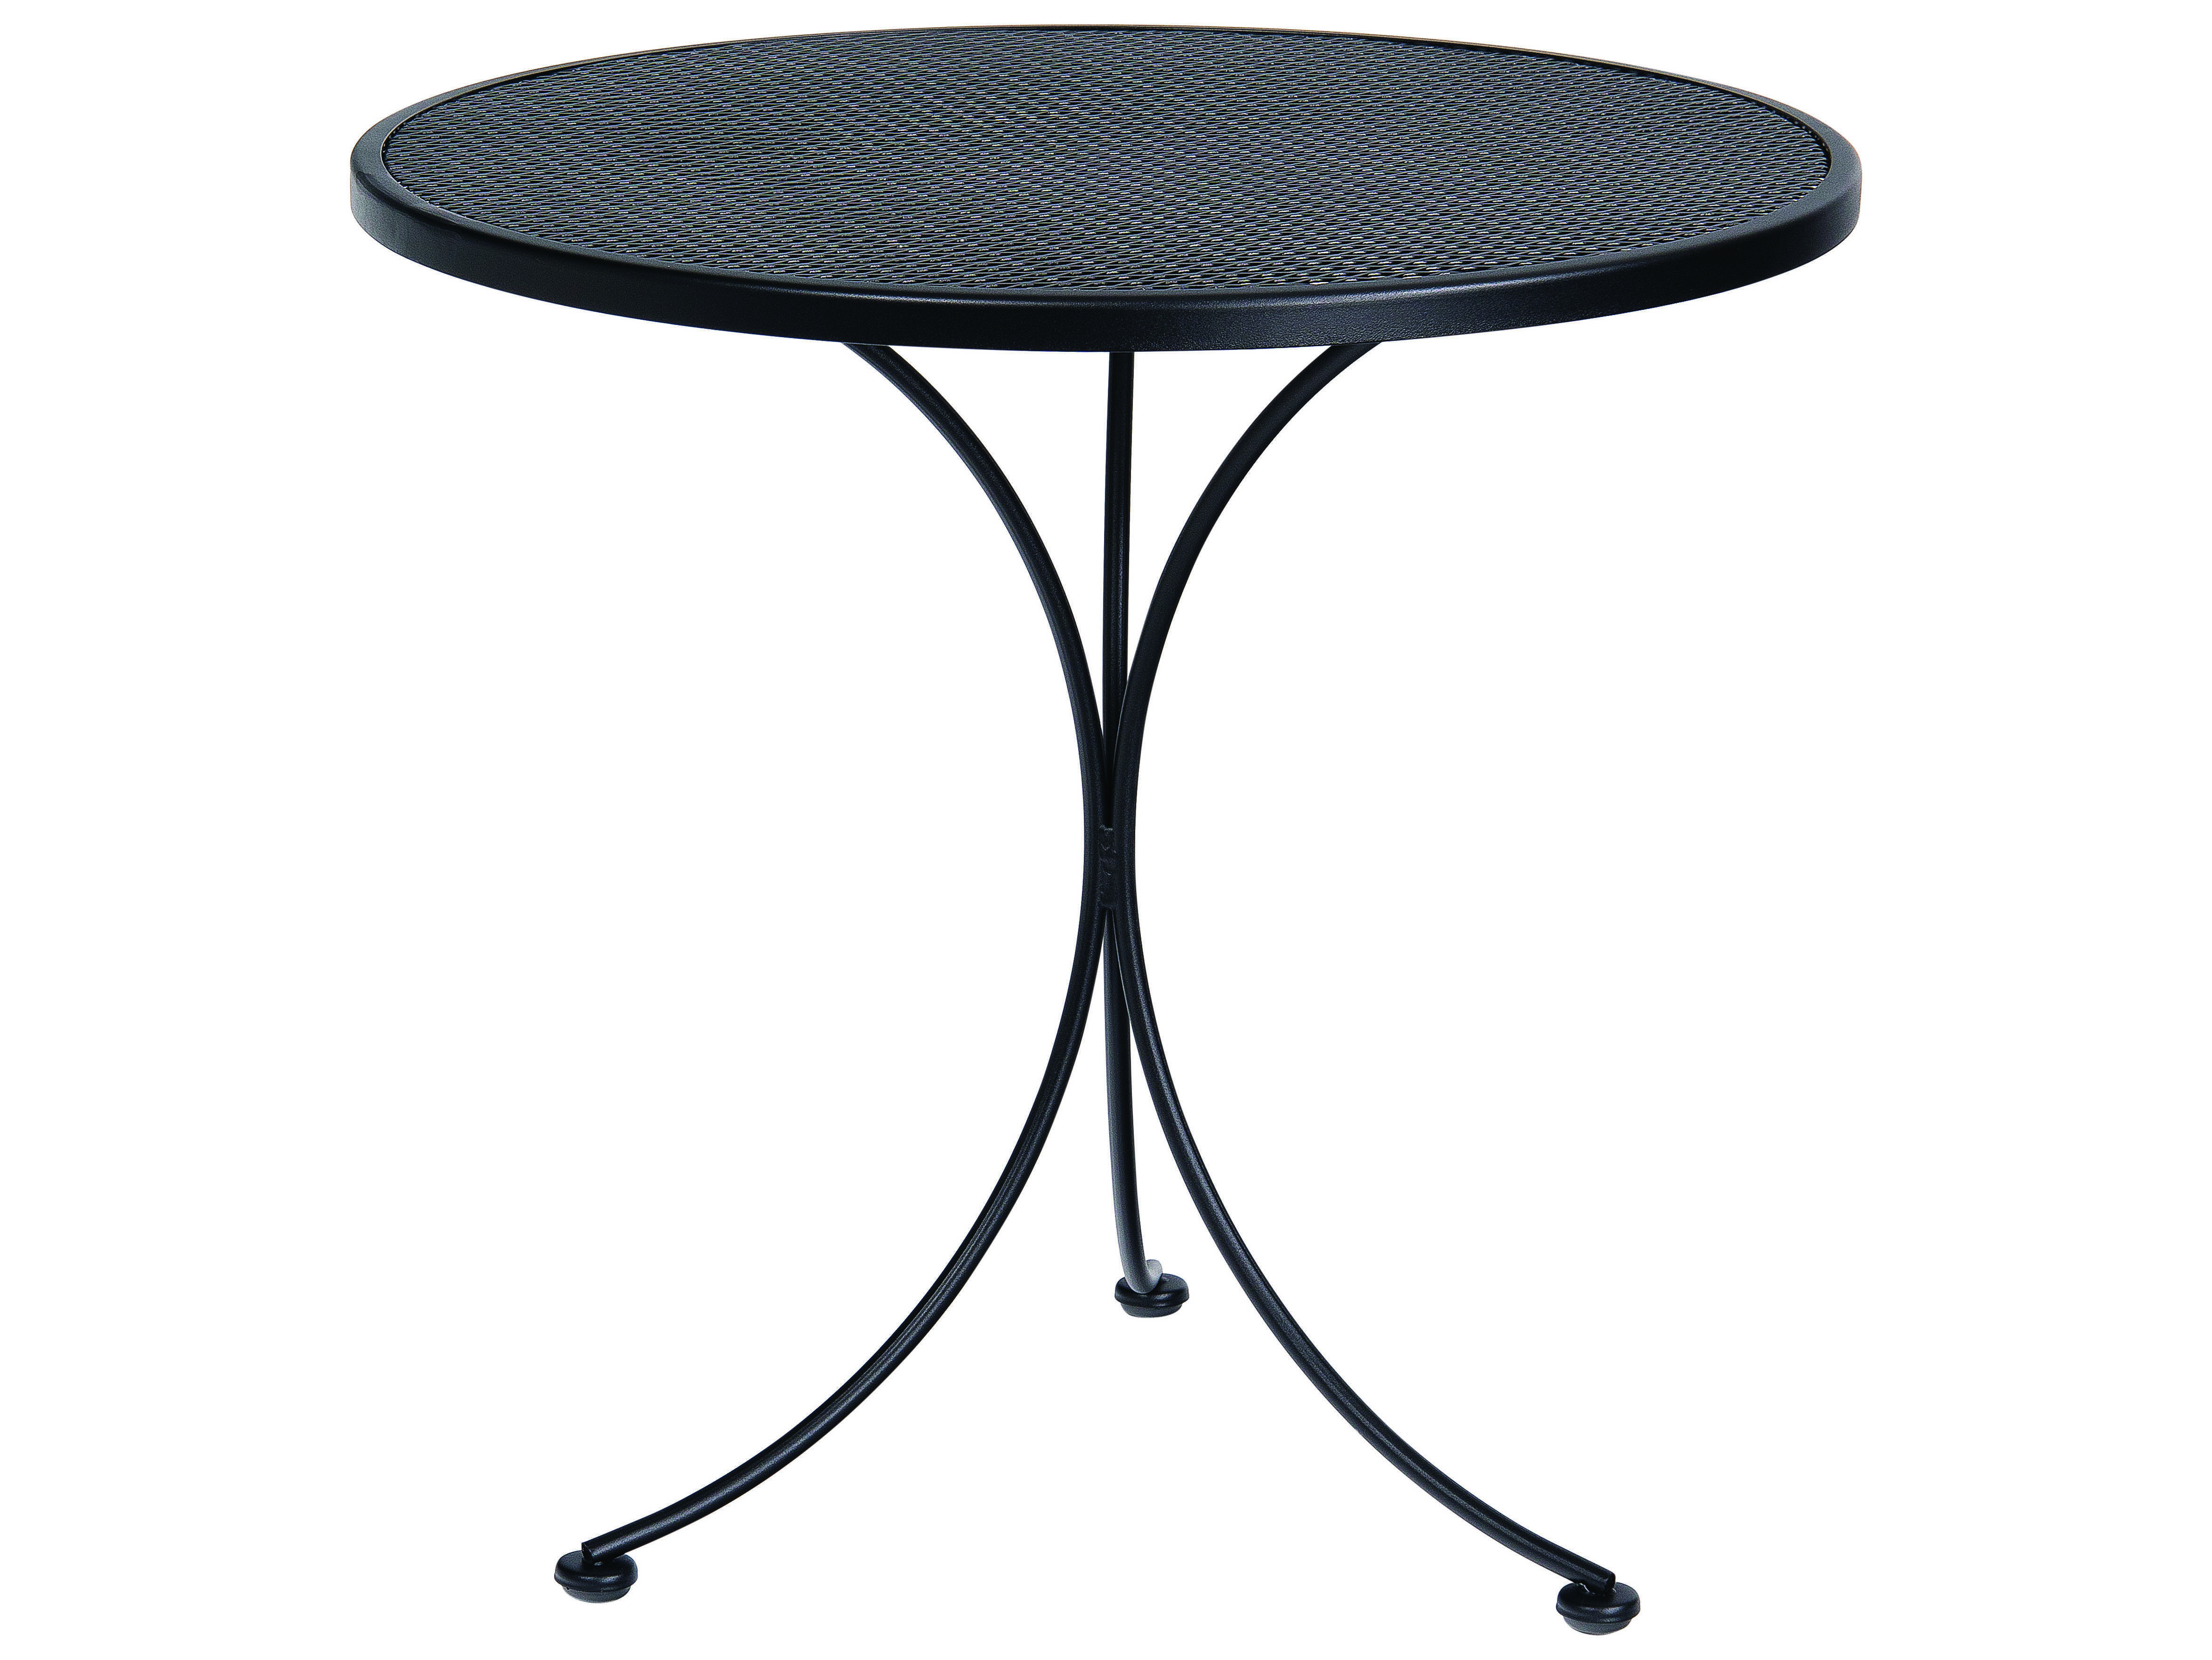 Woodard Wrought Iron Mesh 30 Wide, Round Bistro Table Outdoor